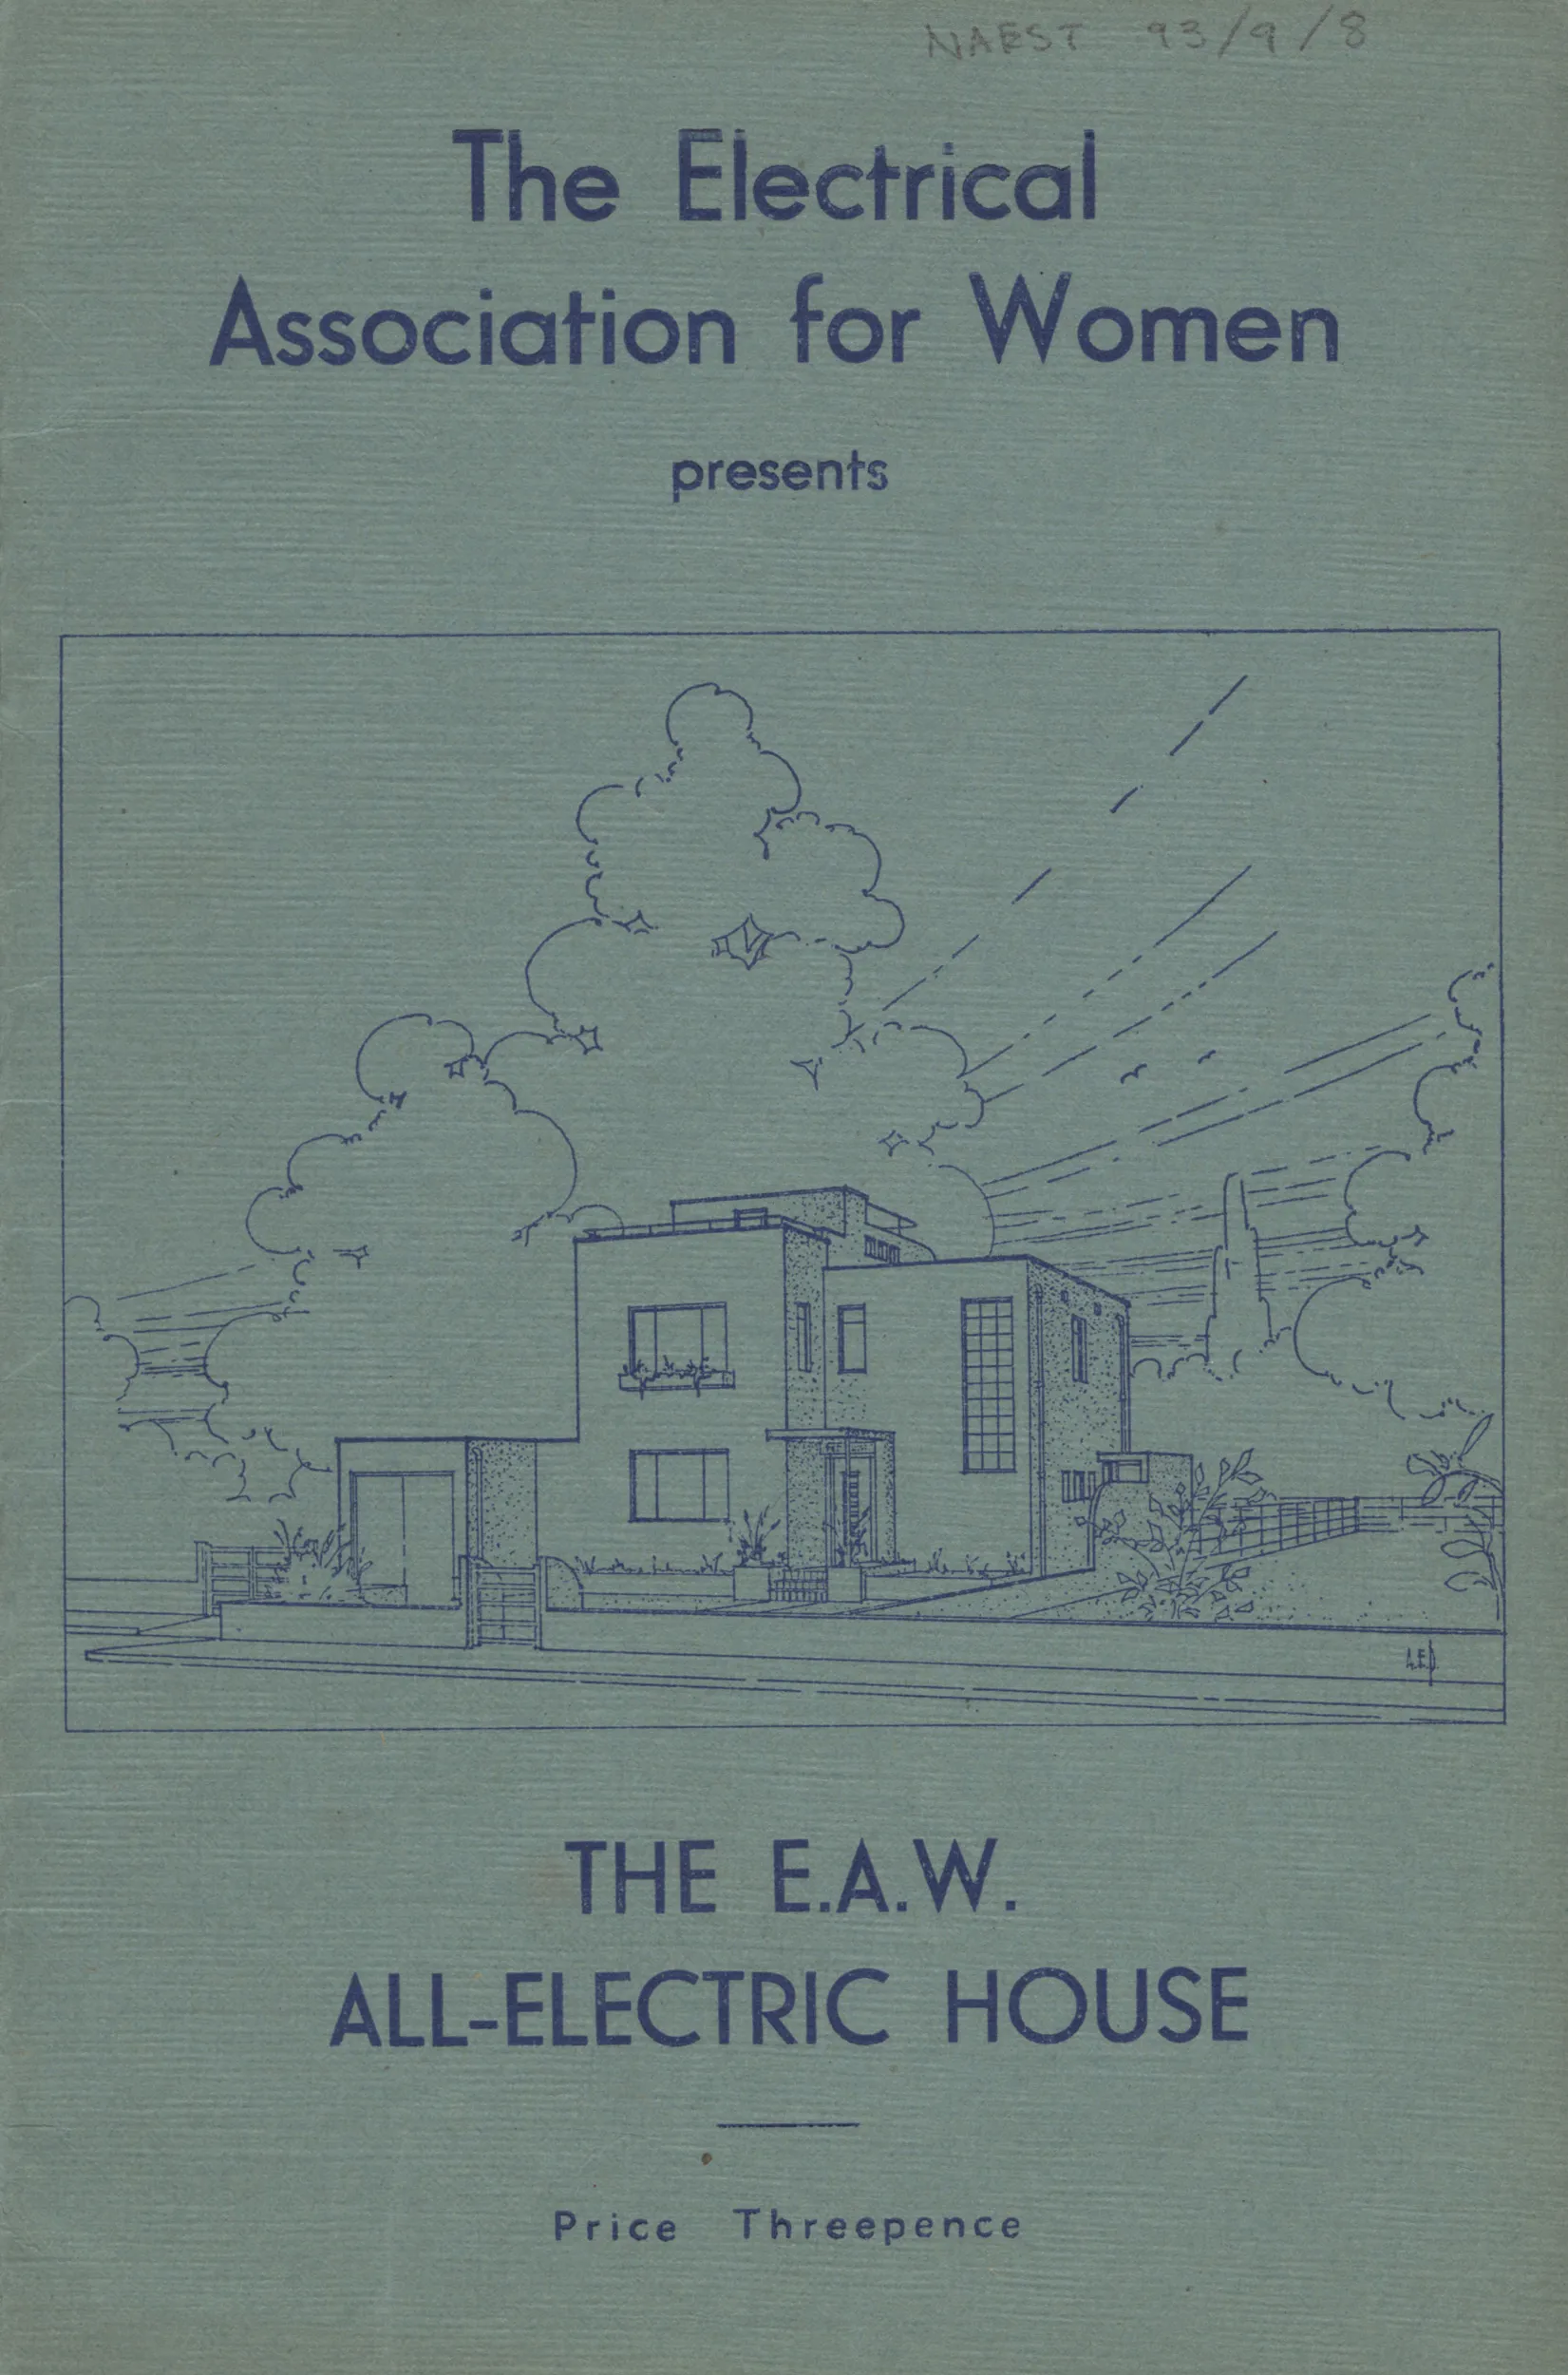 EAW booklet, 'The EAW all-electric house' date unknown c.1936 IET Archives ref NAEST 093/09/08.